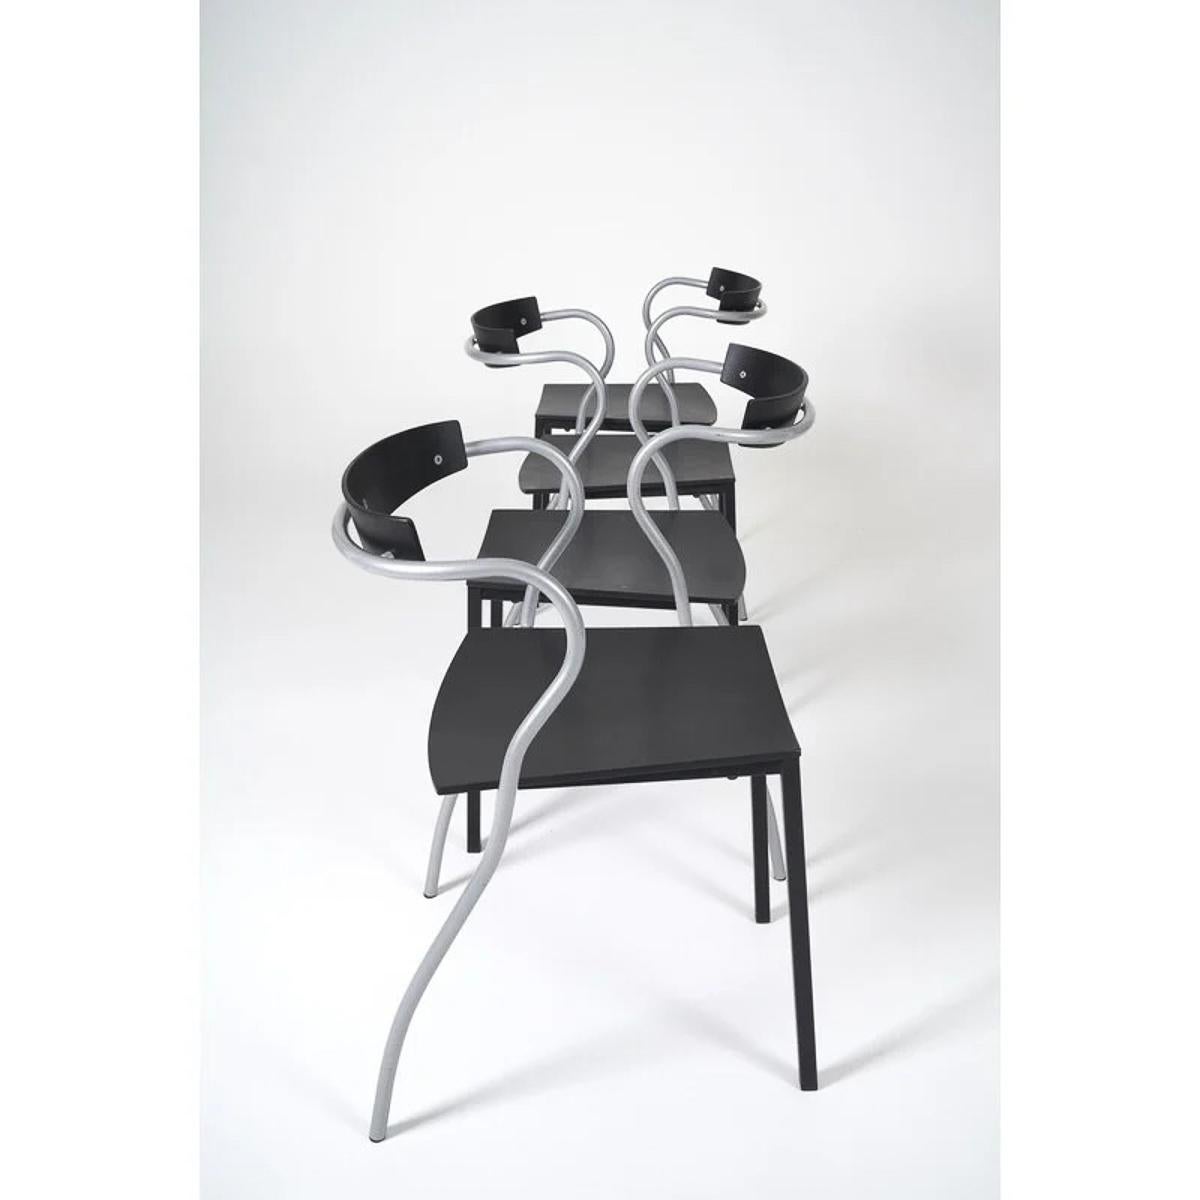 A pair of stackable chairs designed by Pascal Mourgue and manufactured by Artelano in Paris in the early 1990s. Simple and understated yet curvy and sexy, the Rio chairs are made of black enameled curved plywood and curvy tubular metal frames. The